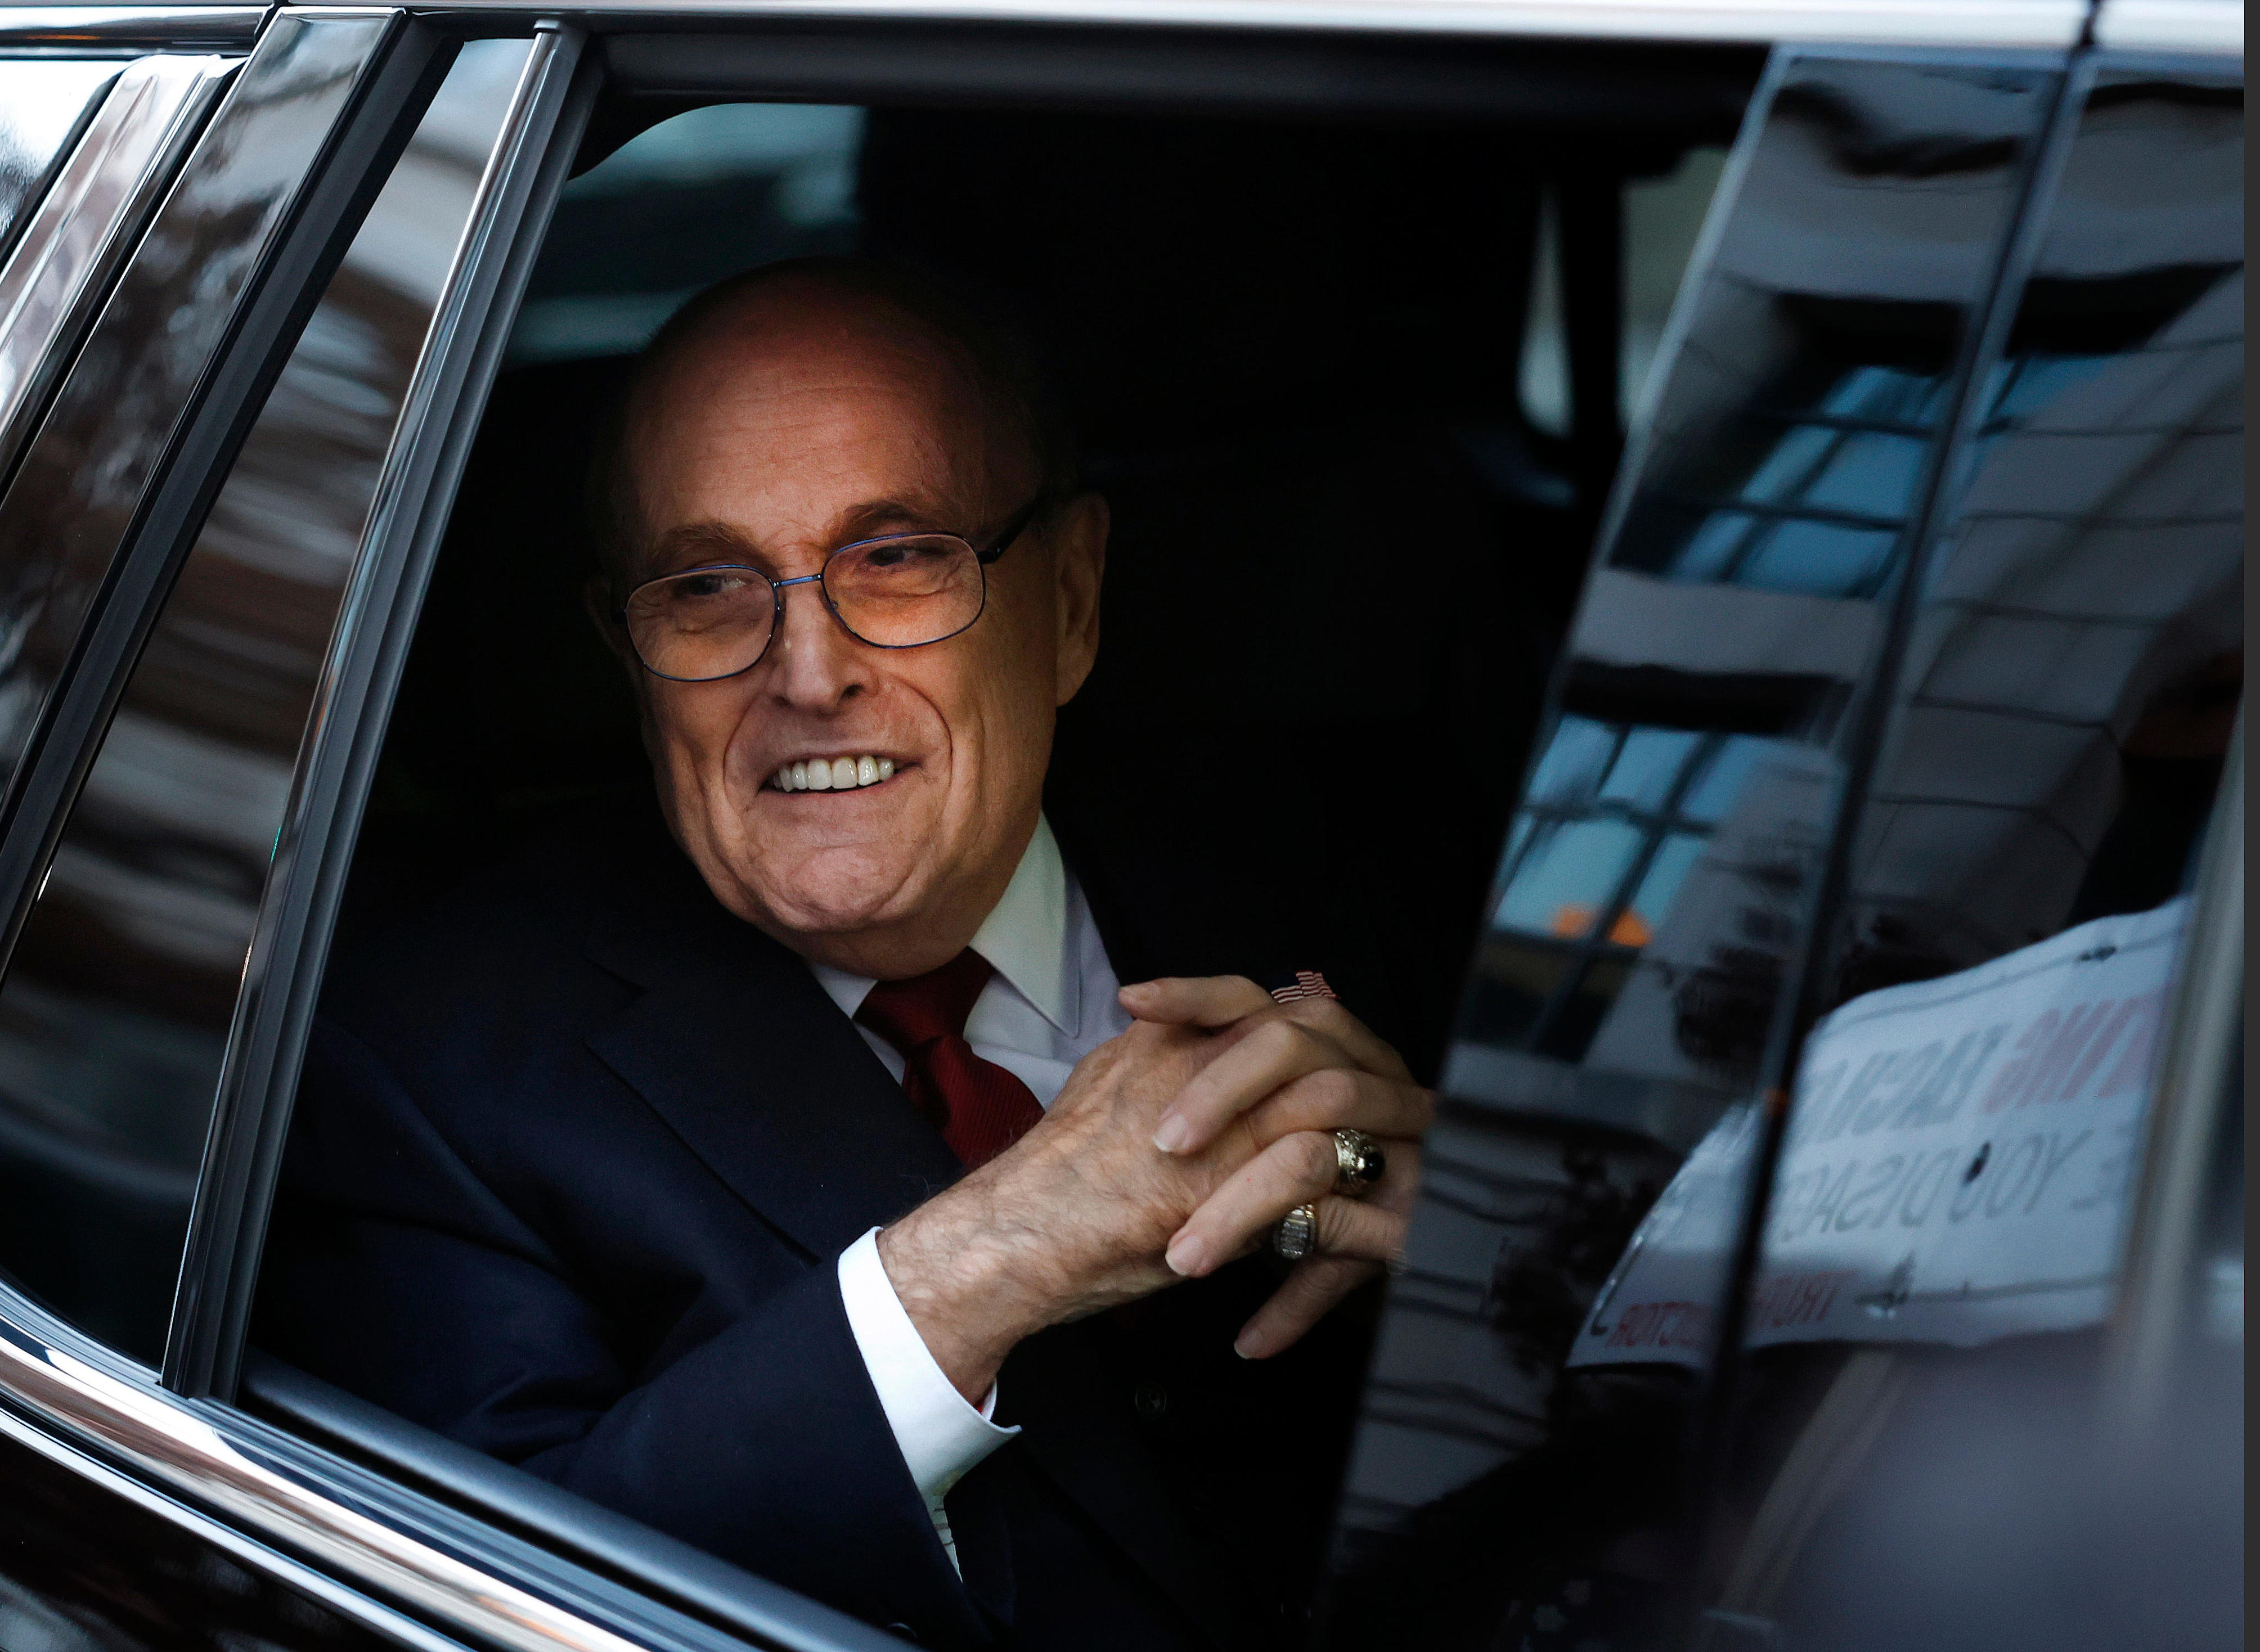 giuliani appeals $148 million payment in georgia election defamation case